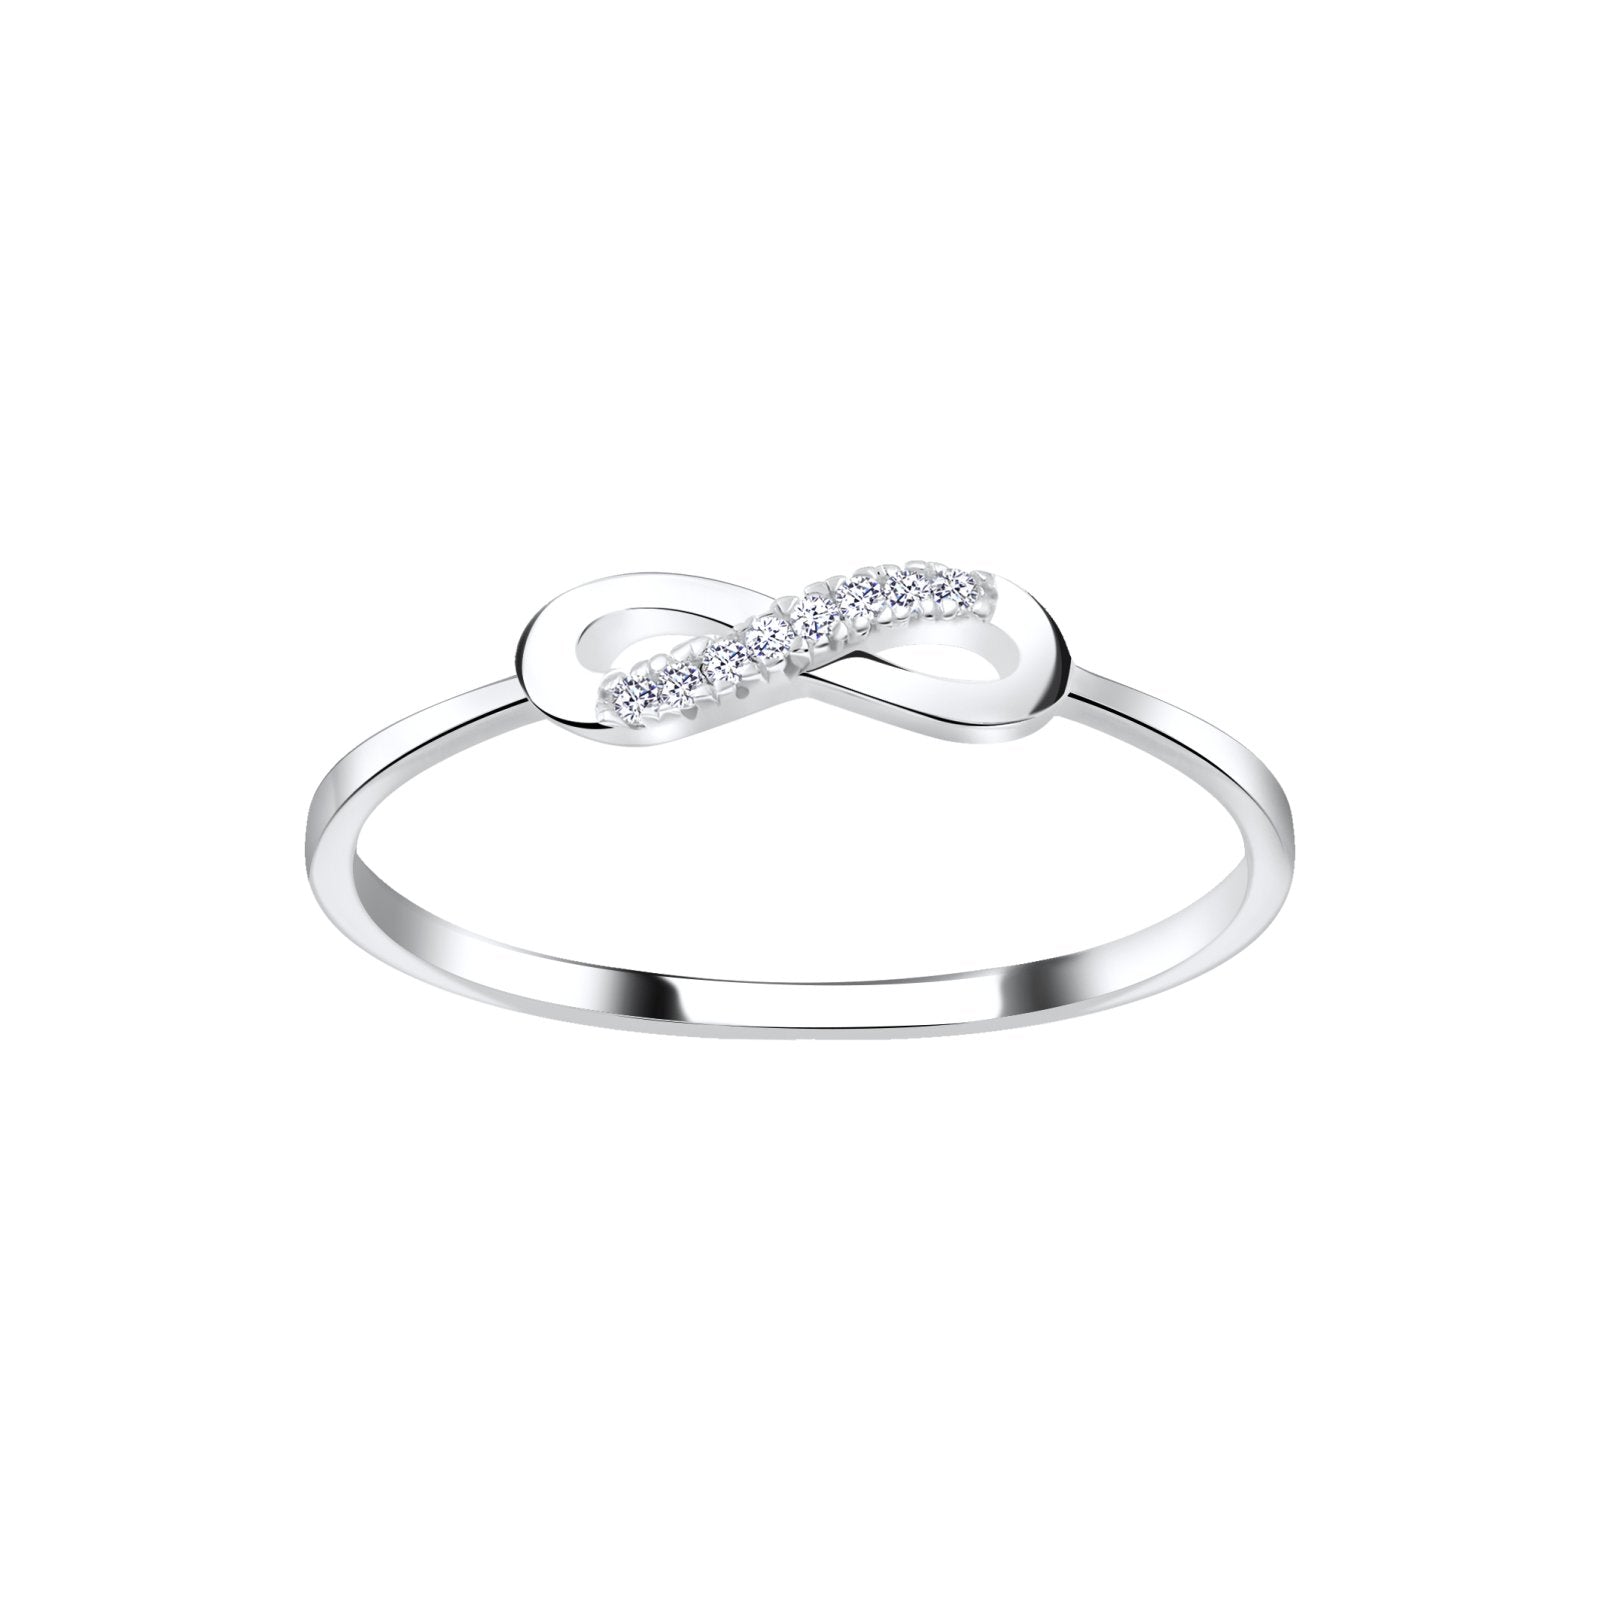 Silver Infinity Ring setting with Cubic Zirconia